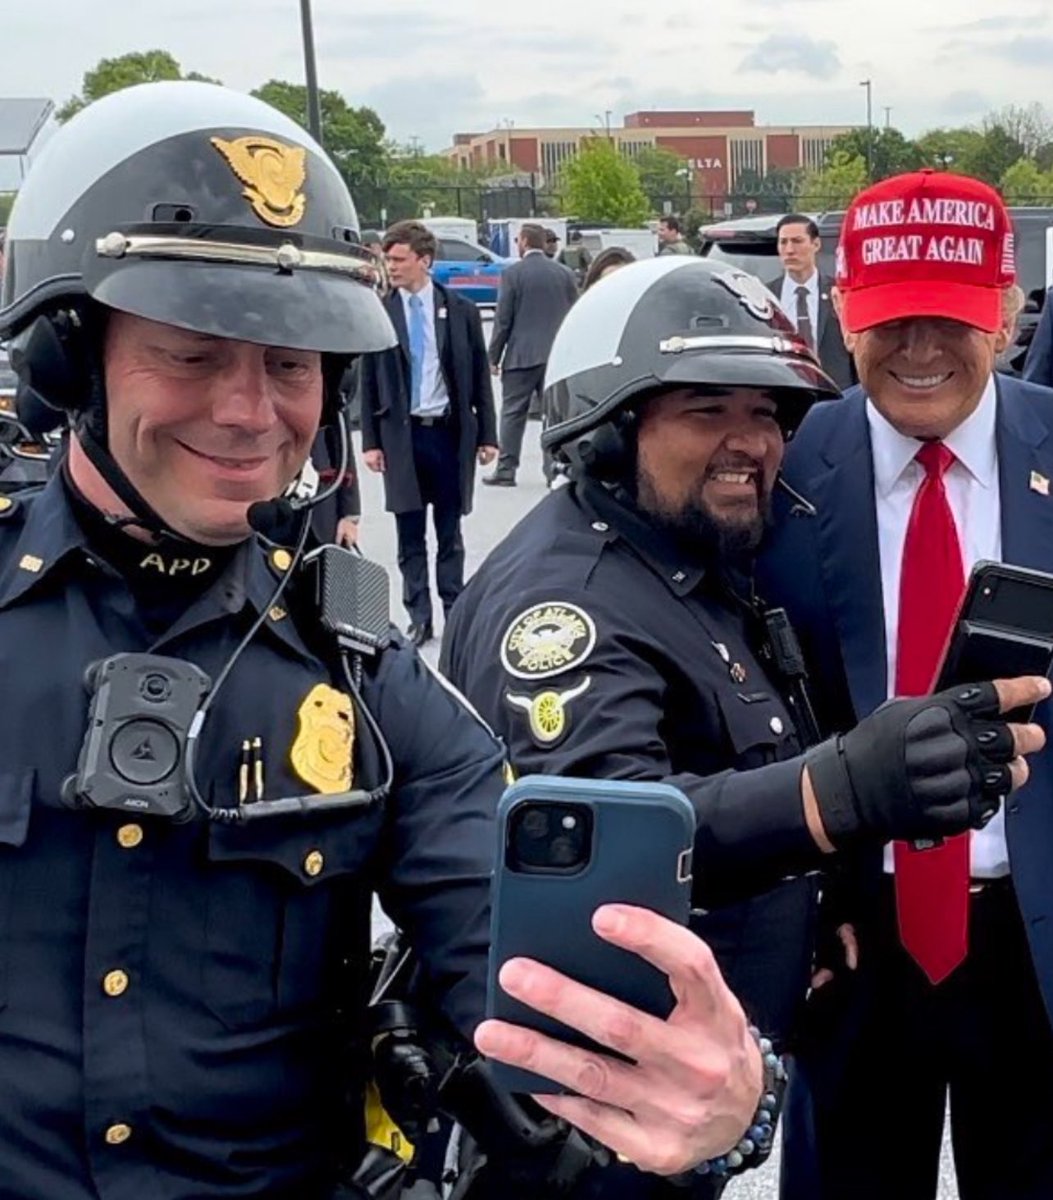 @dom_lucre Epic photo Atlanta Police Officers are all smiles posing with Trump for selfies. 🤳 This is who Fani Willis wants to arrest Trump. Total backfire.